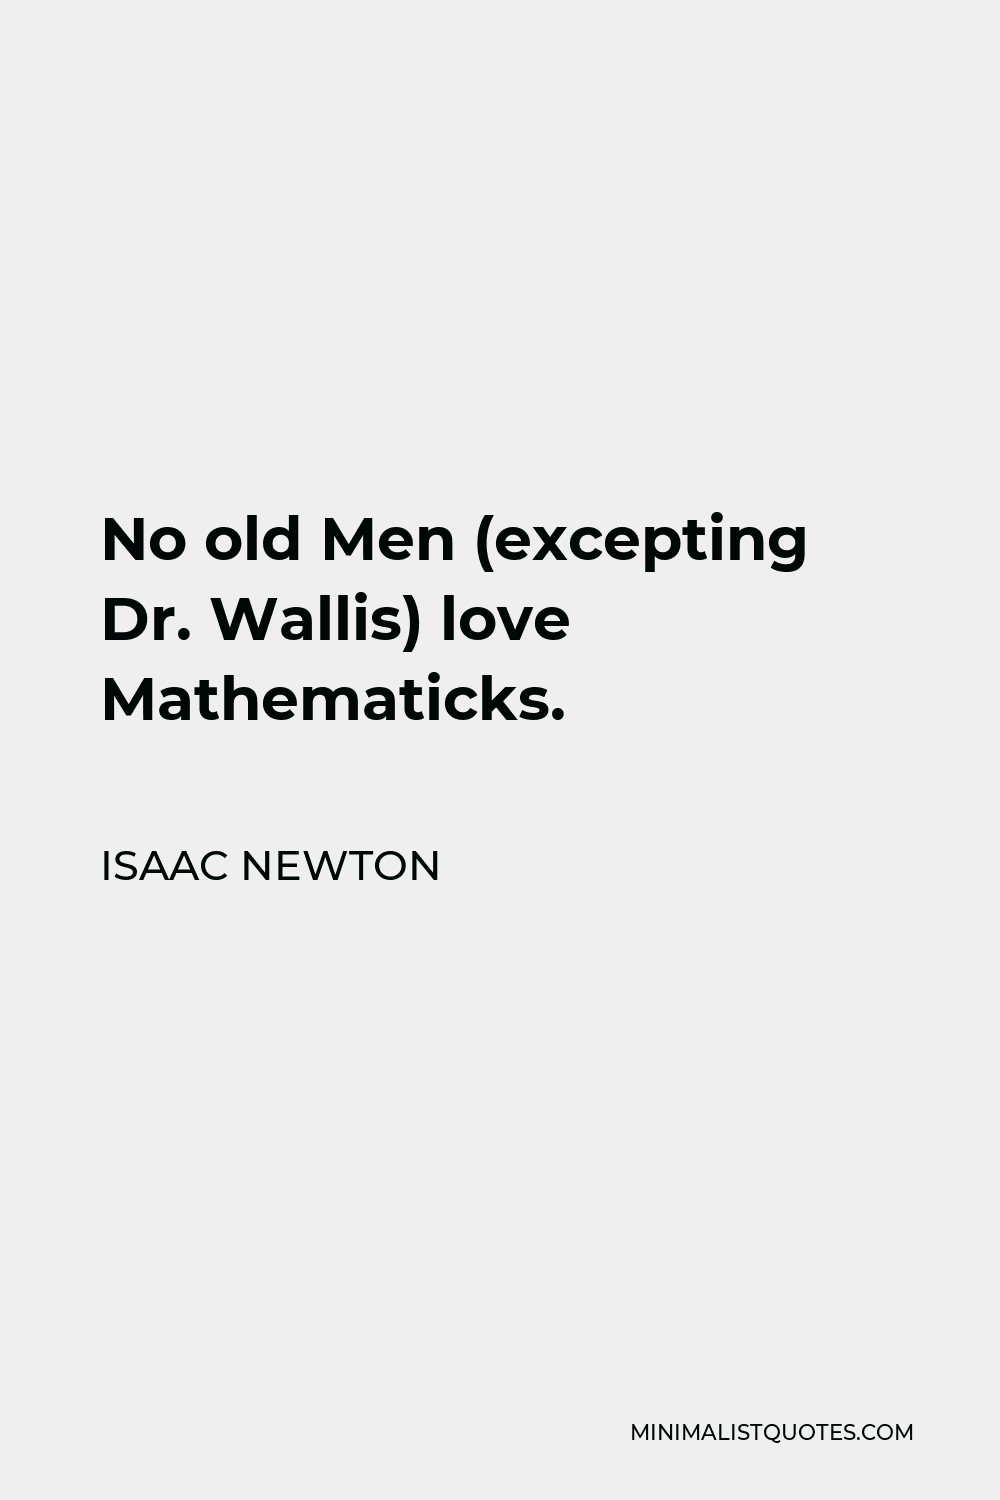 Isaac Newton Quote - No old Men (excepting Dr. Wallis) love Mathematicks.